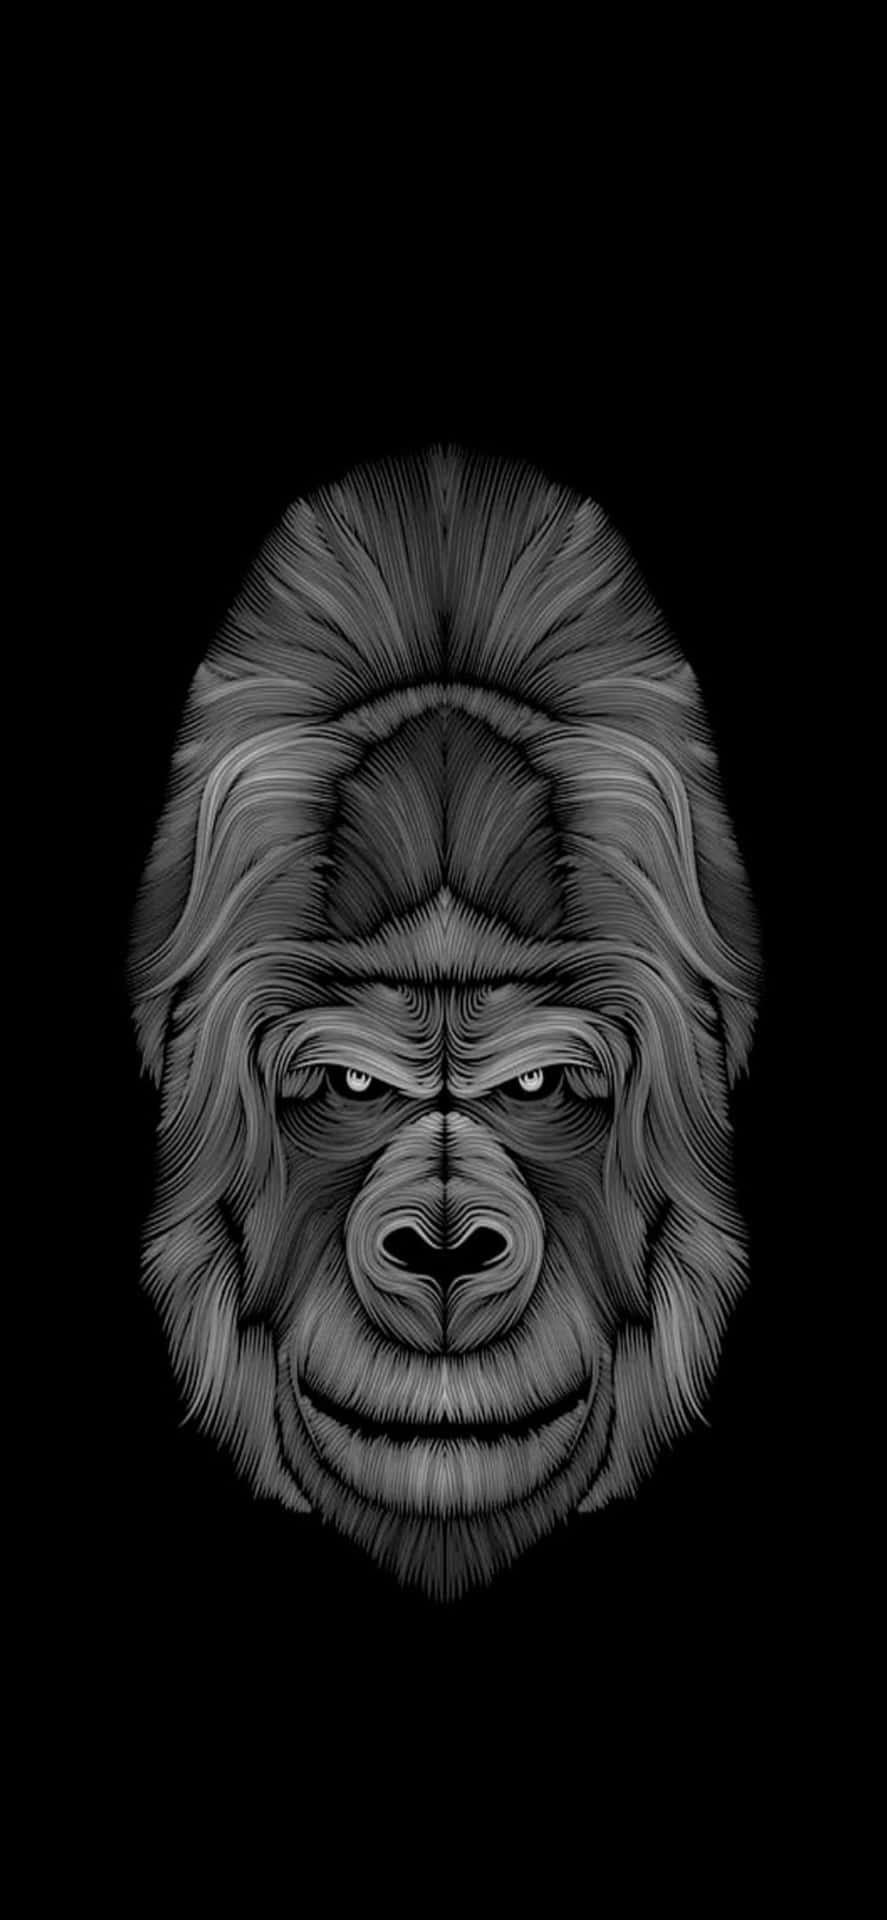 Ready for a wild journey? Get the revolutionary iPhone X Gorilla.